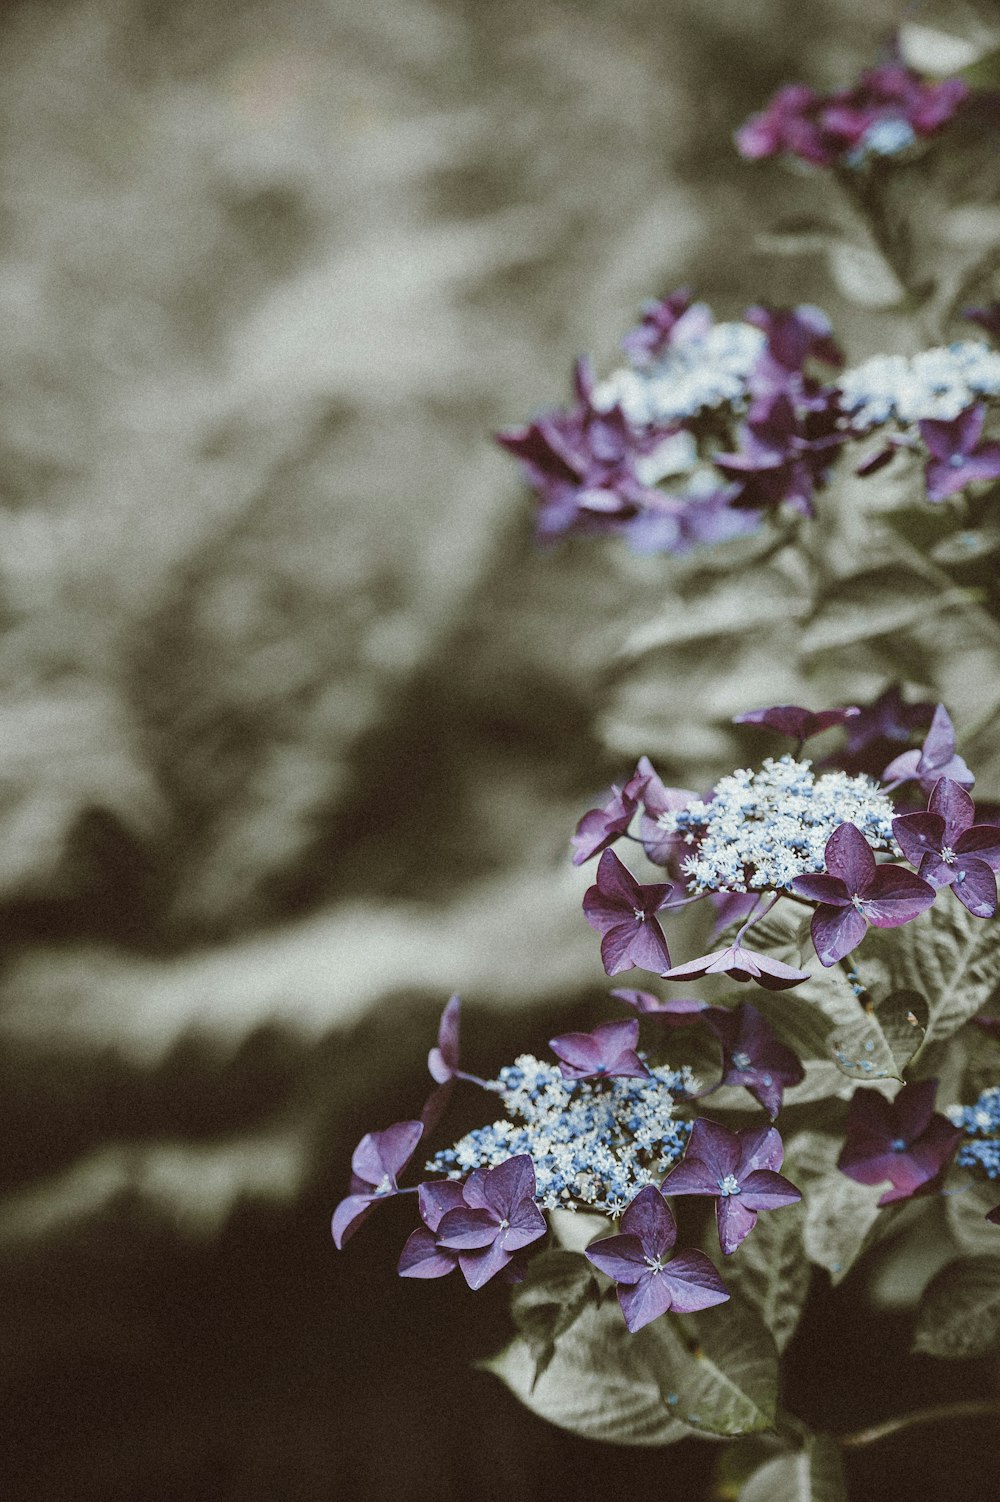 shallow focus photography of purple and white flowers